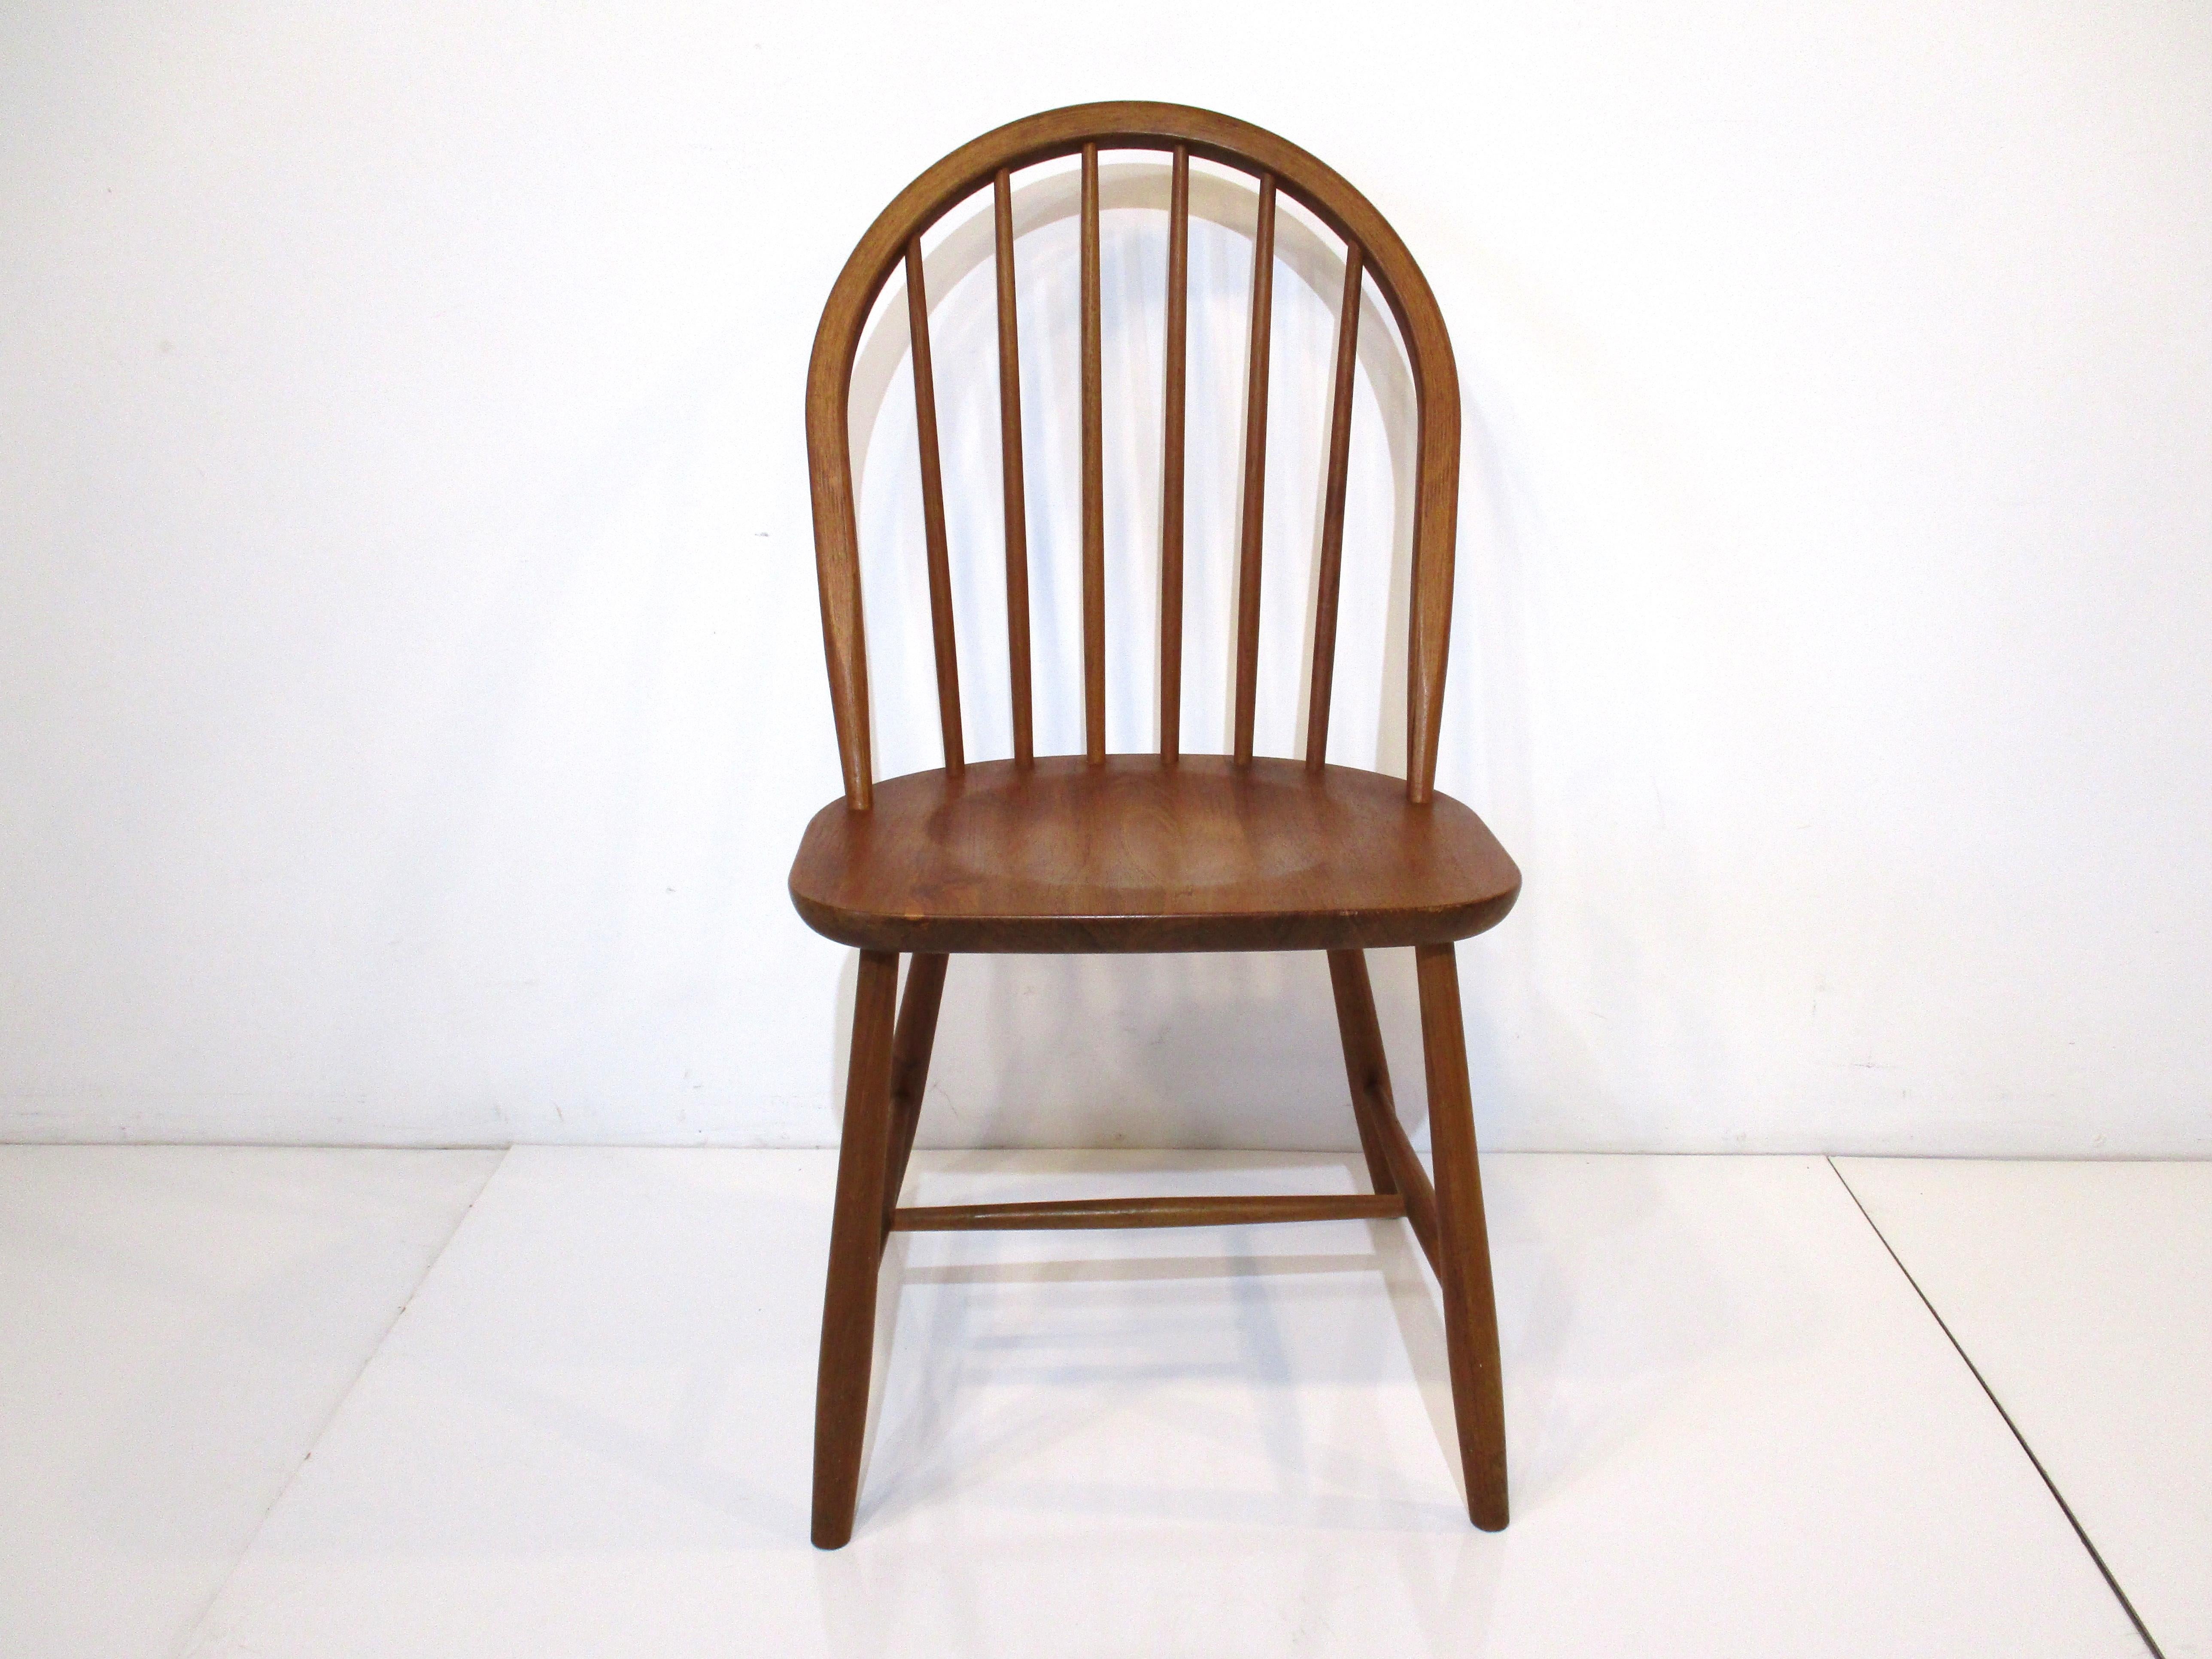 A set of six spindle back curved framed teak wood dining chairs consisting of four with U shaped seats and two head chairs with curved edged seats. Well constructed and very sturdy these would work with many different styles and interiors. Designed